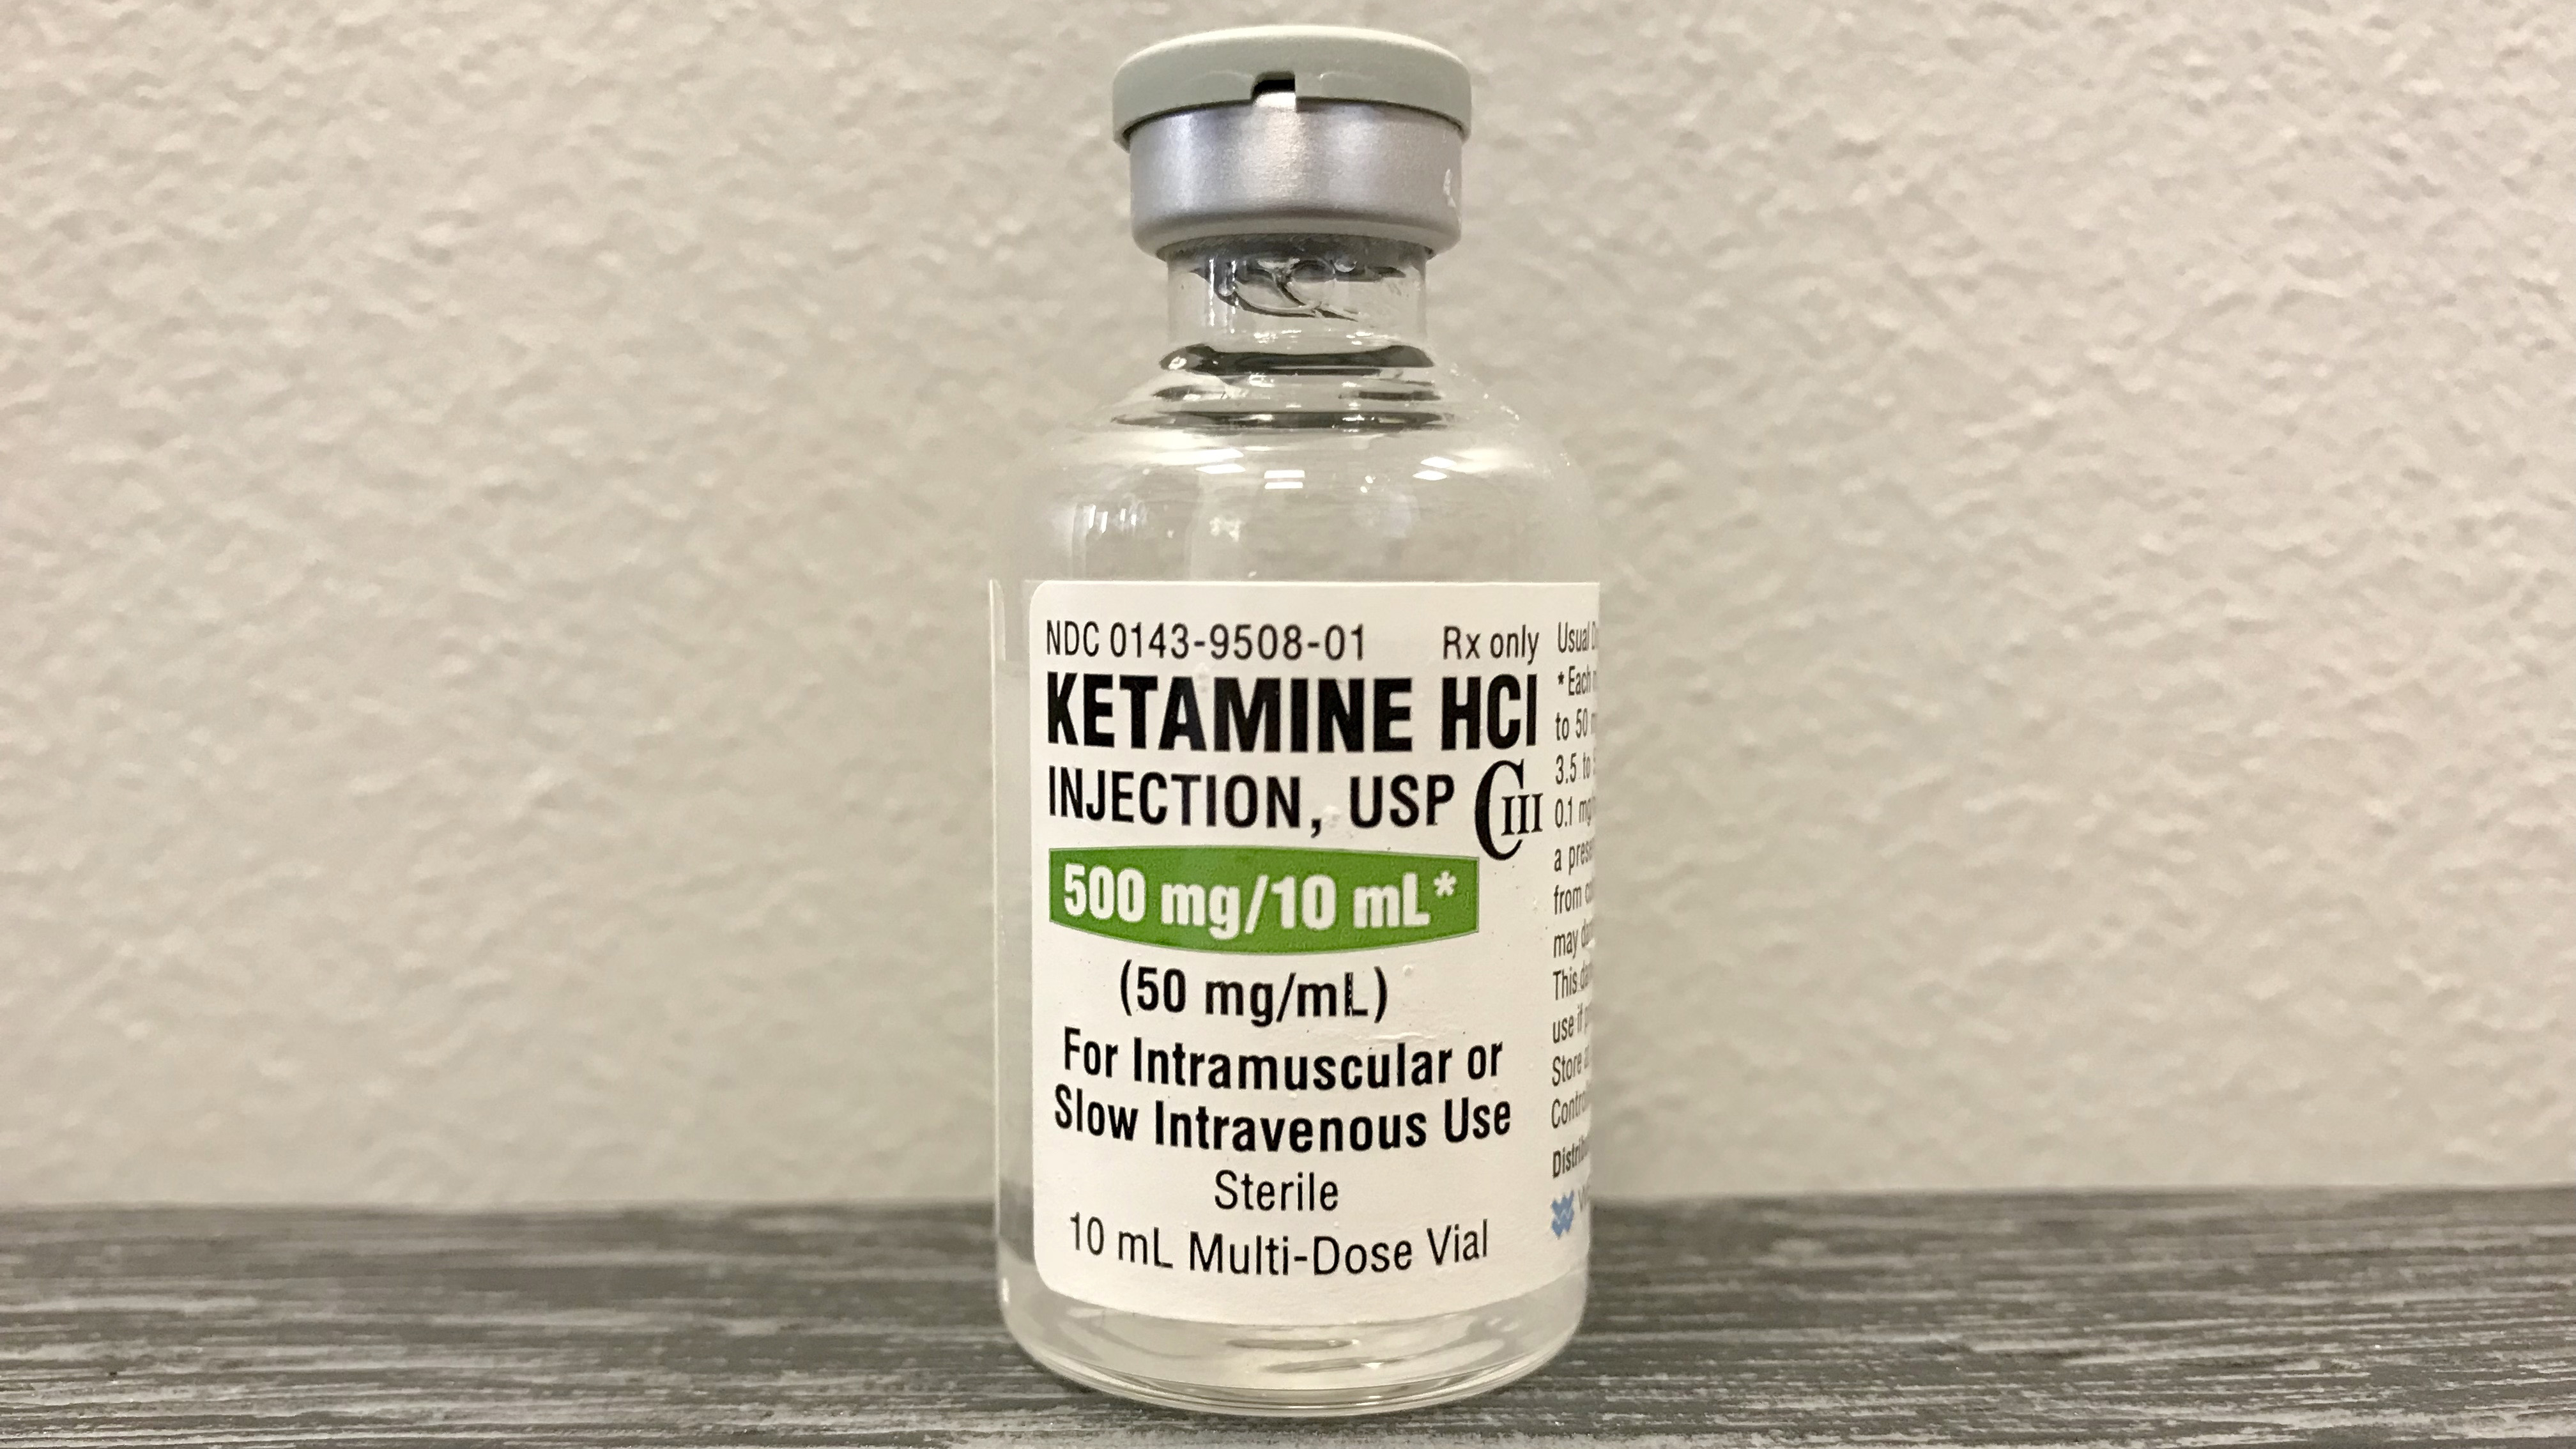 Ketamine offers lifeline for people with severe depression, suicidal thoughts | CNN